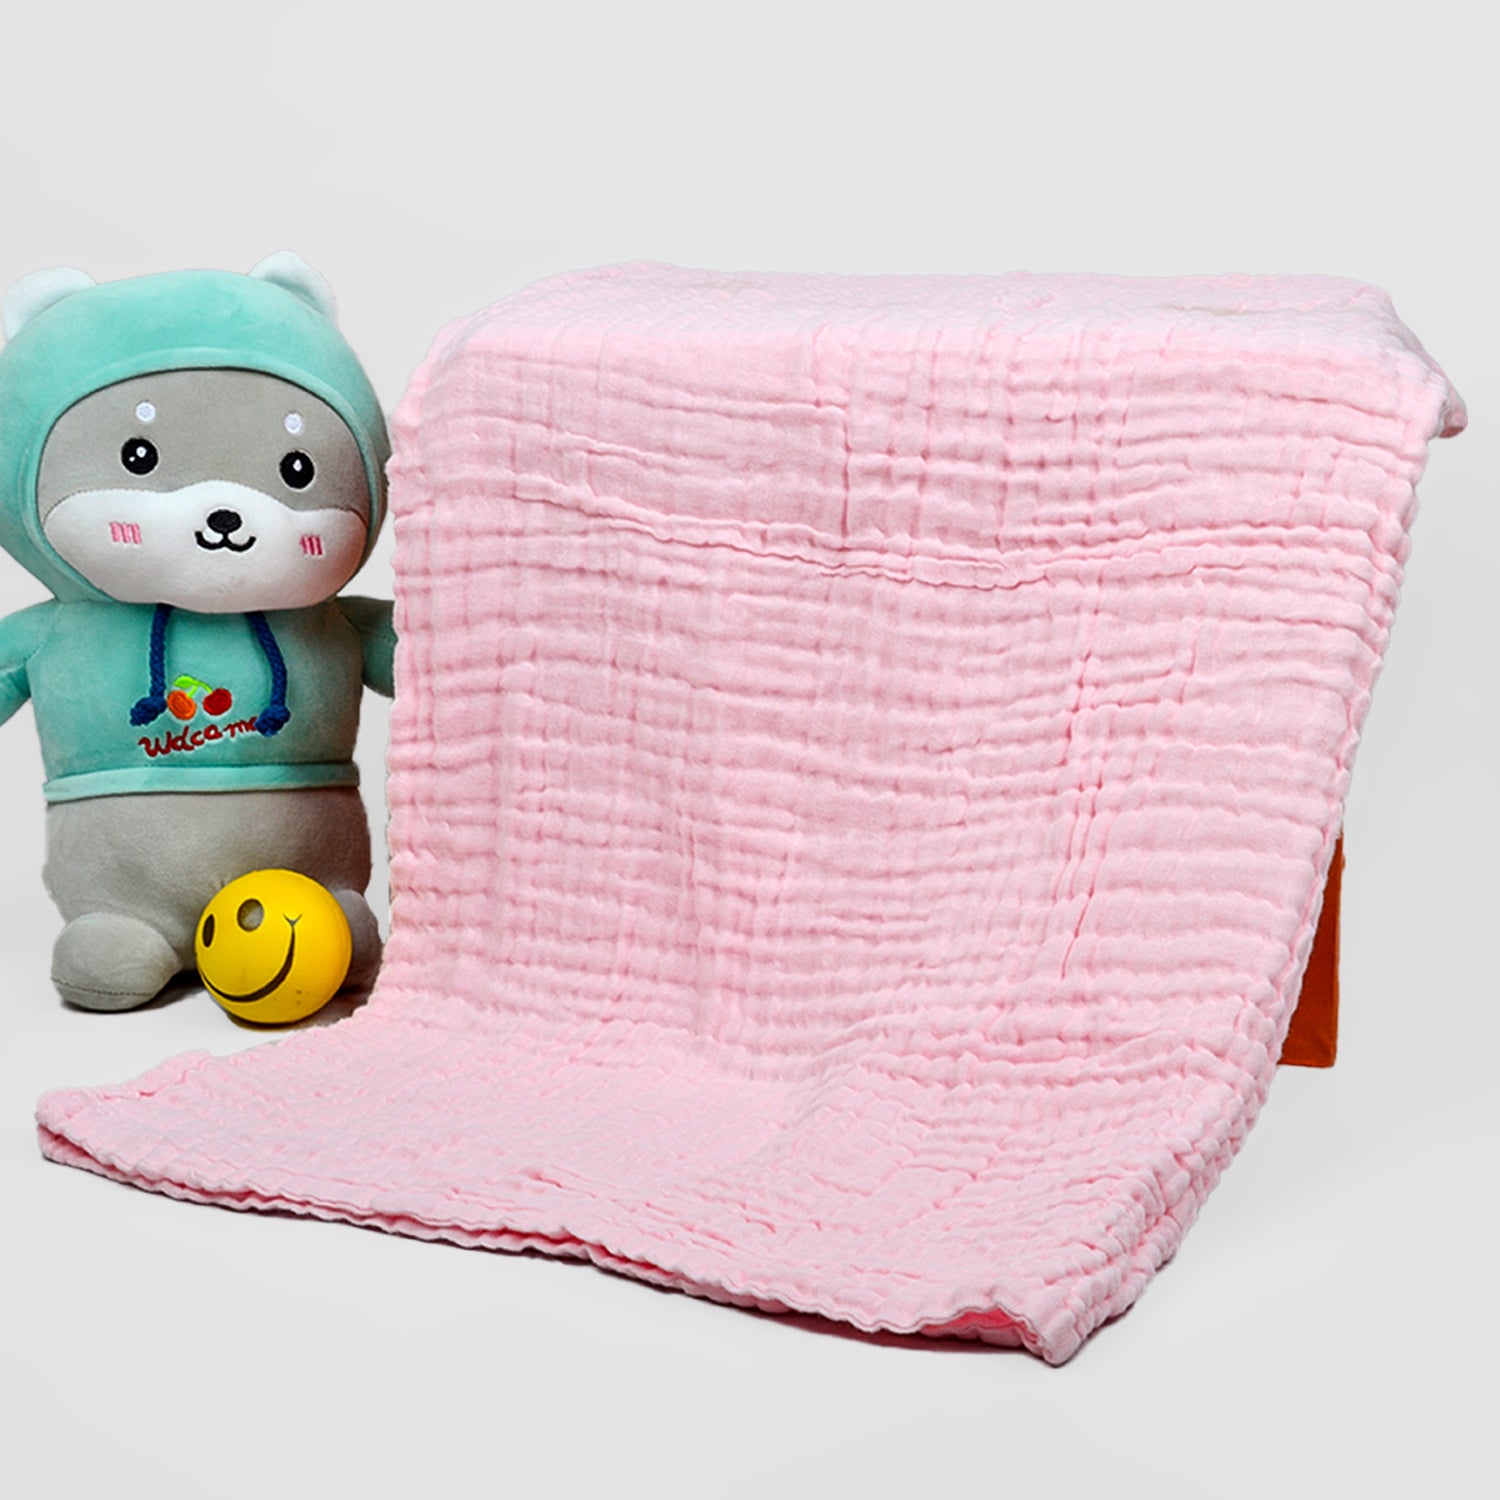 Baby Super Soft Absorbent Muslin 6 Layer wash Towel-100X100 CM-(0-3 Years)- Pink